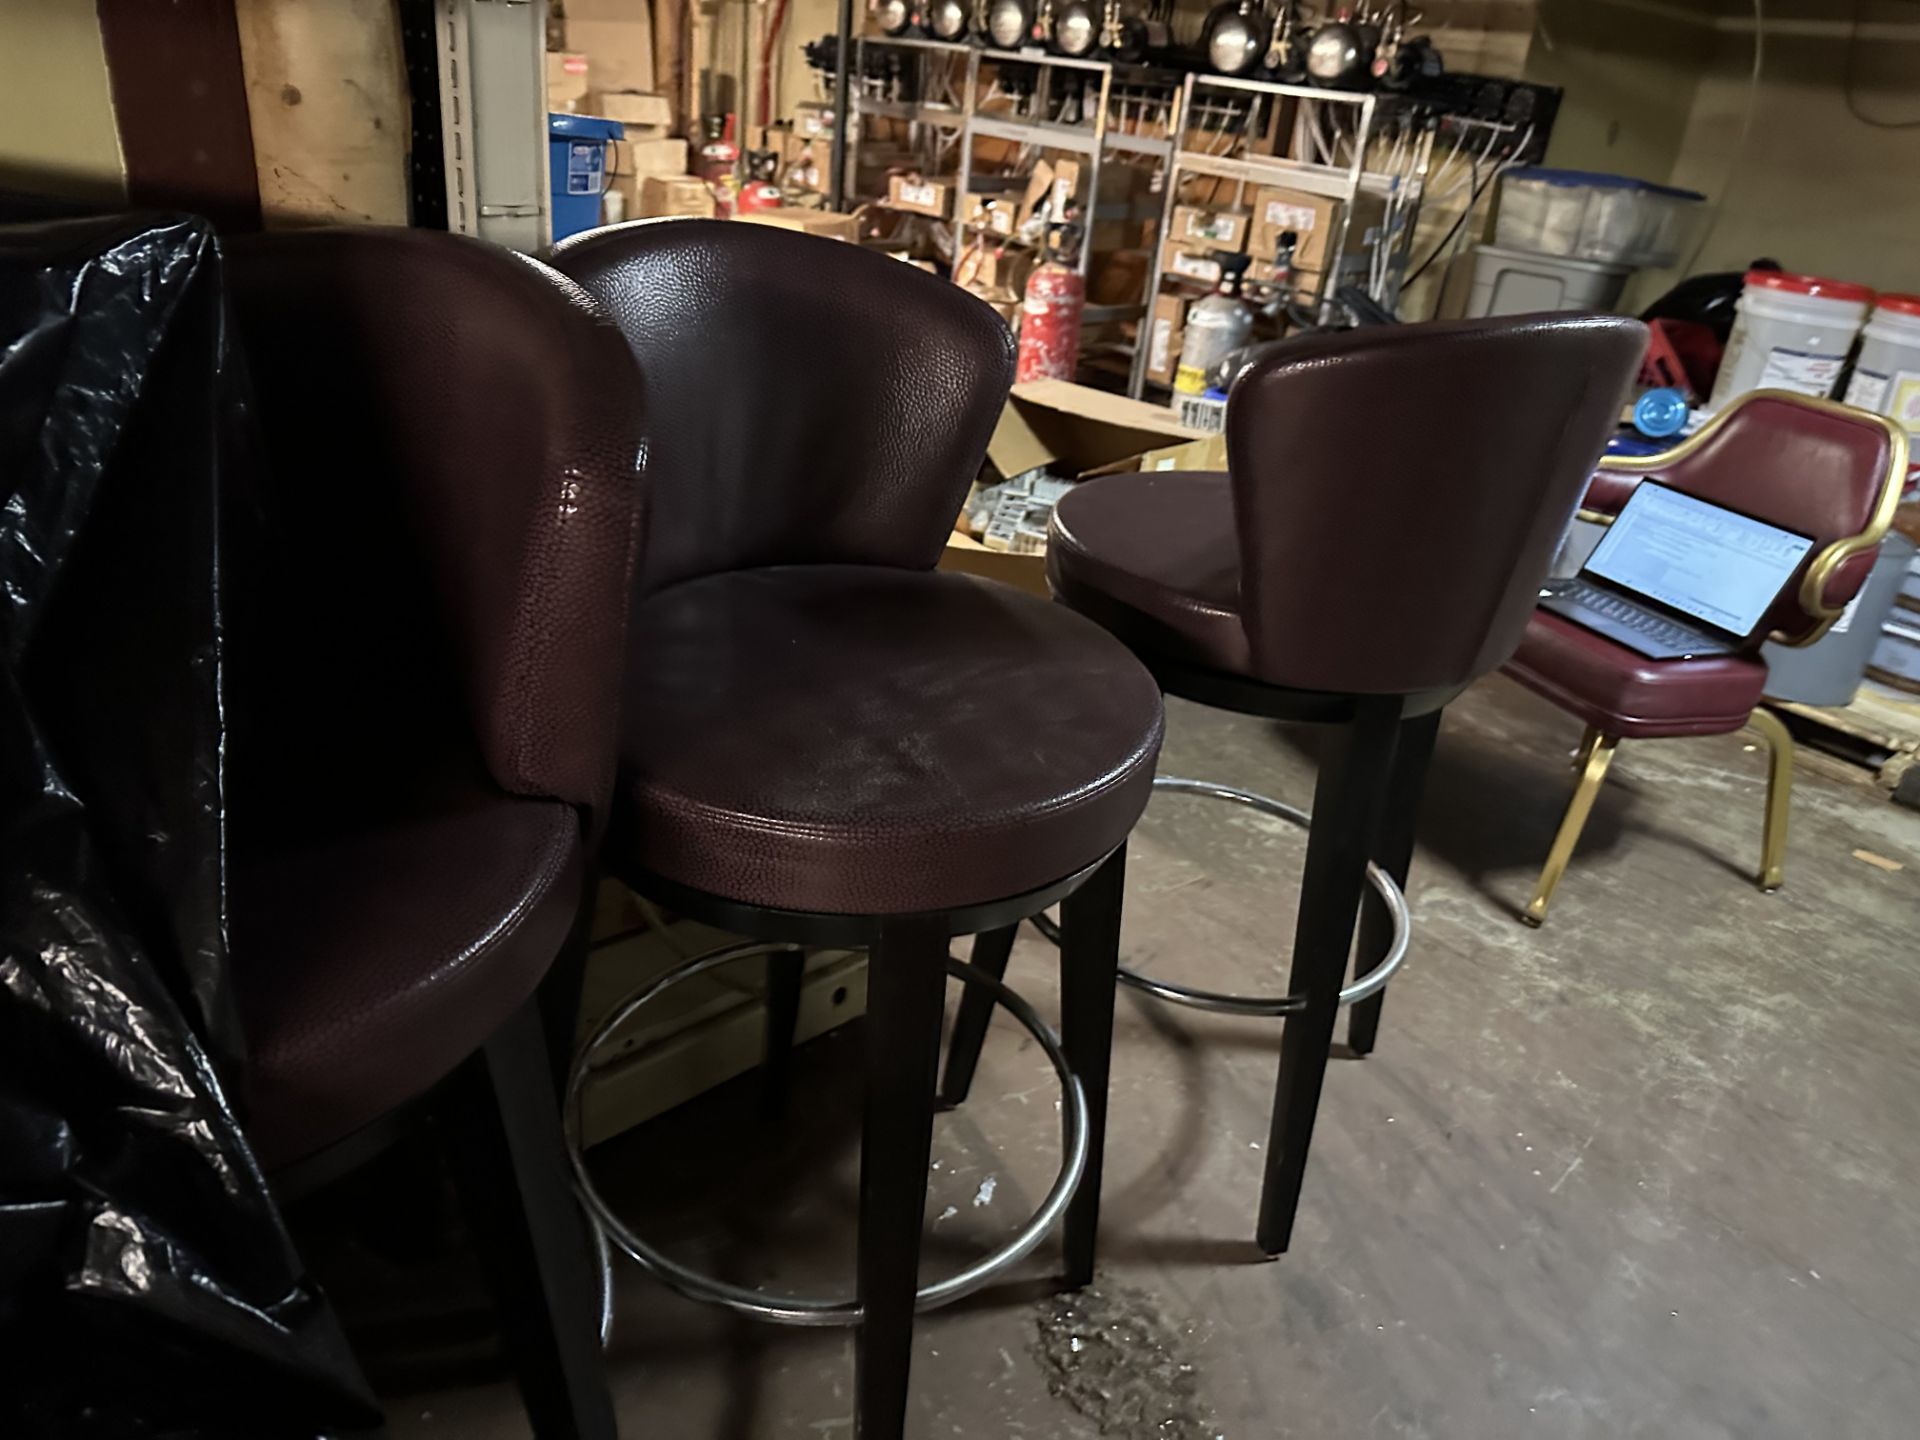 {LOT} All Seating & Furniture in the Mezzanine Area - Bar Stools, Loveseat, Upholstered Seats - Image 3 of 4